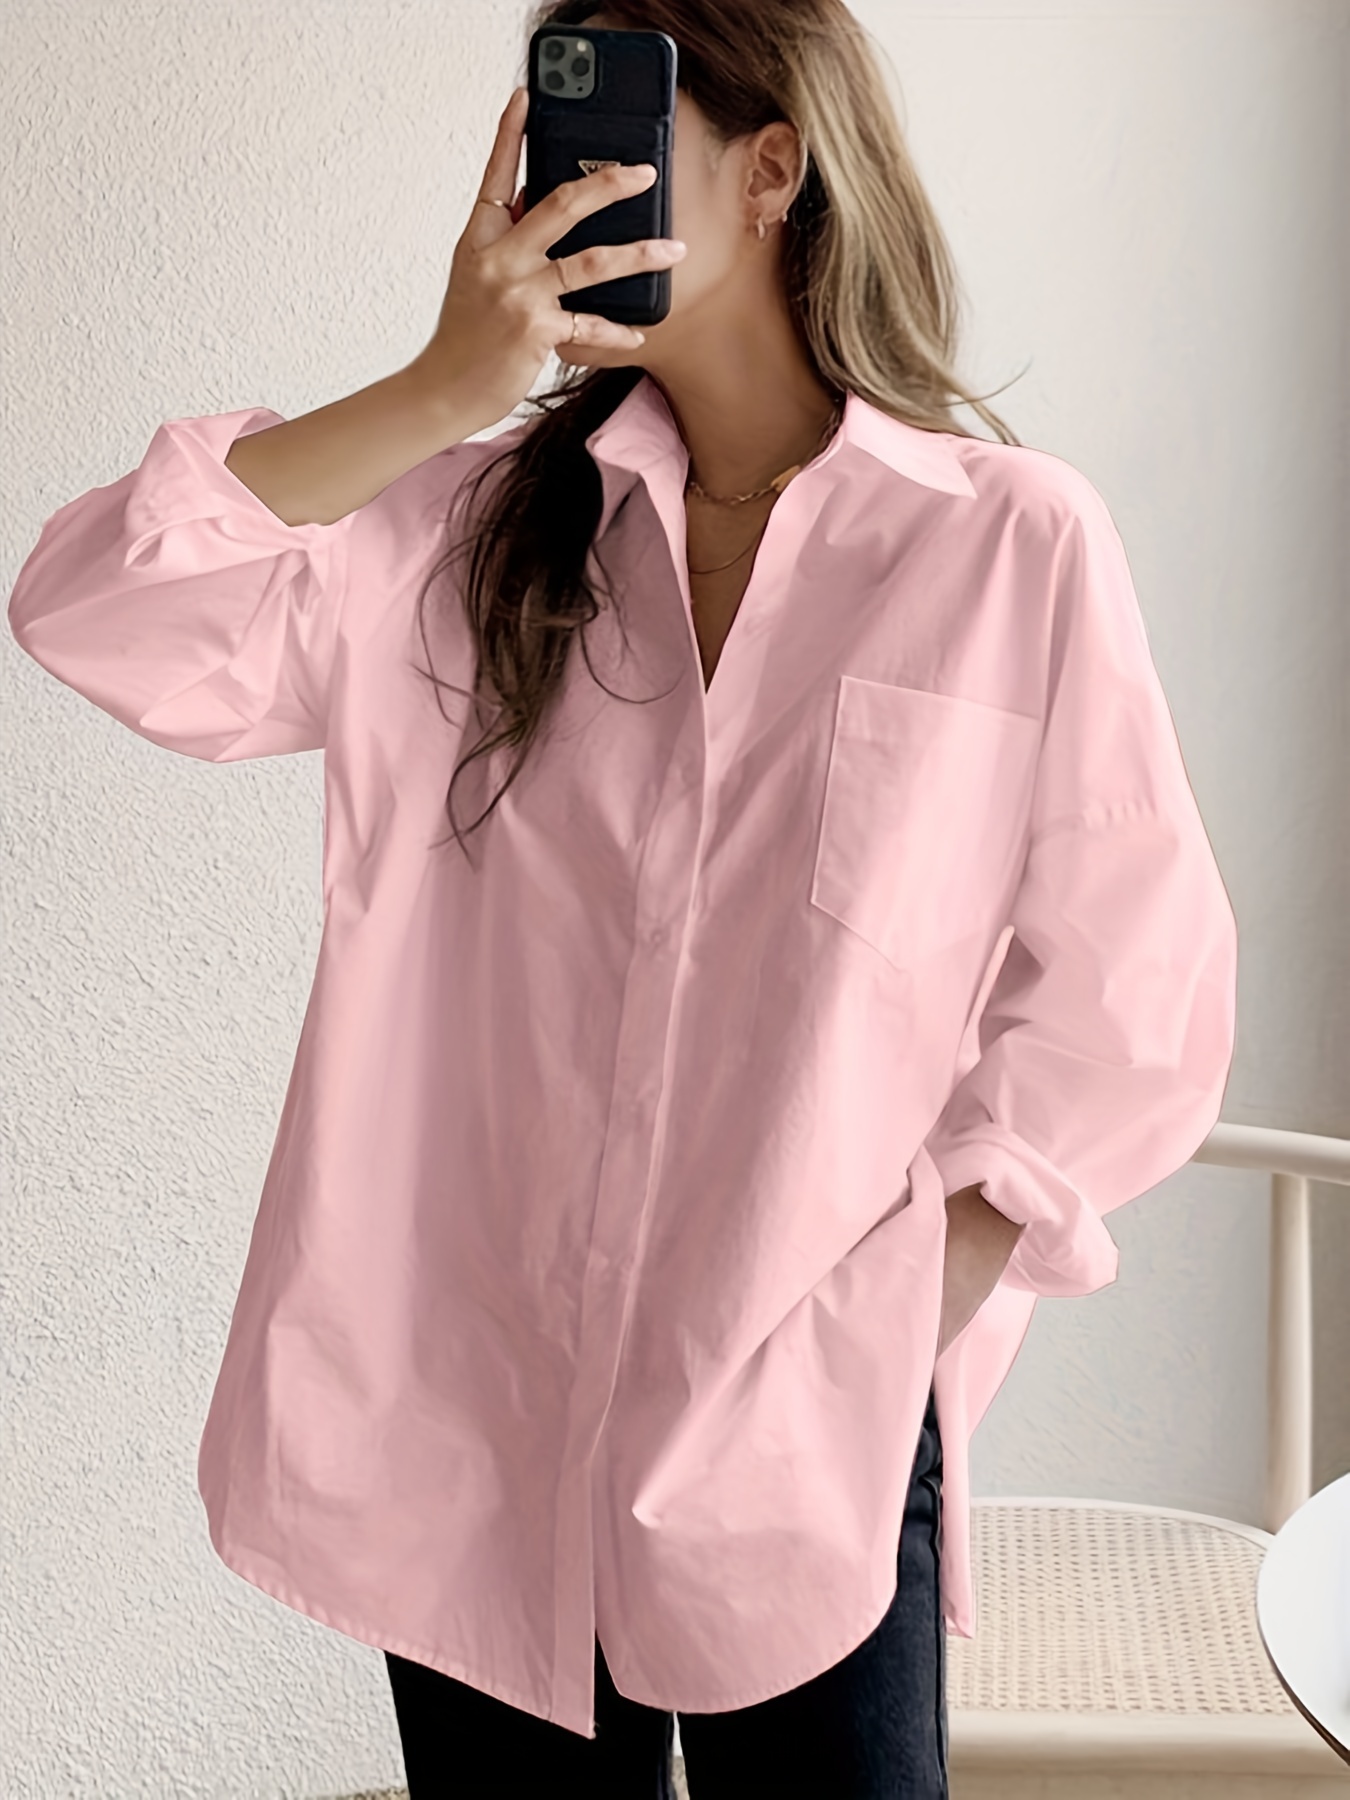 TIANZHU Plus Size Button Down Shirts Women Business Casual Top V Neck  Blouse Short Sleeve Outfit Women's Office Attire L Black NO PROCKET at   Women's Clothing store